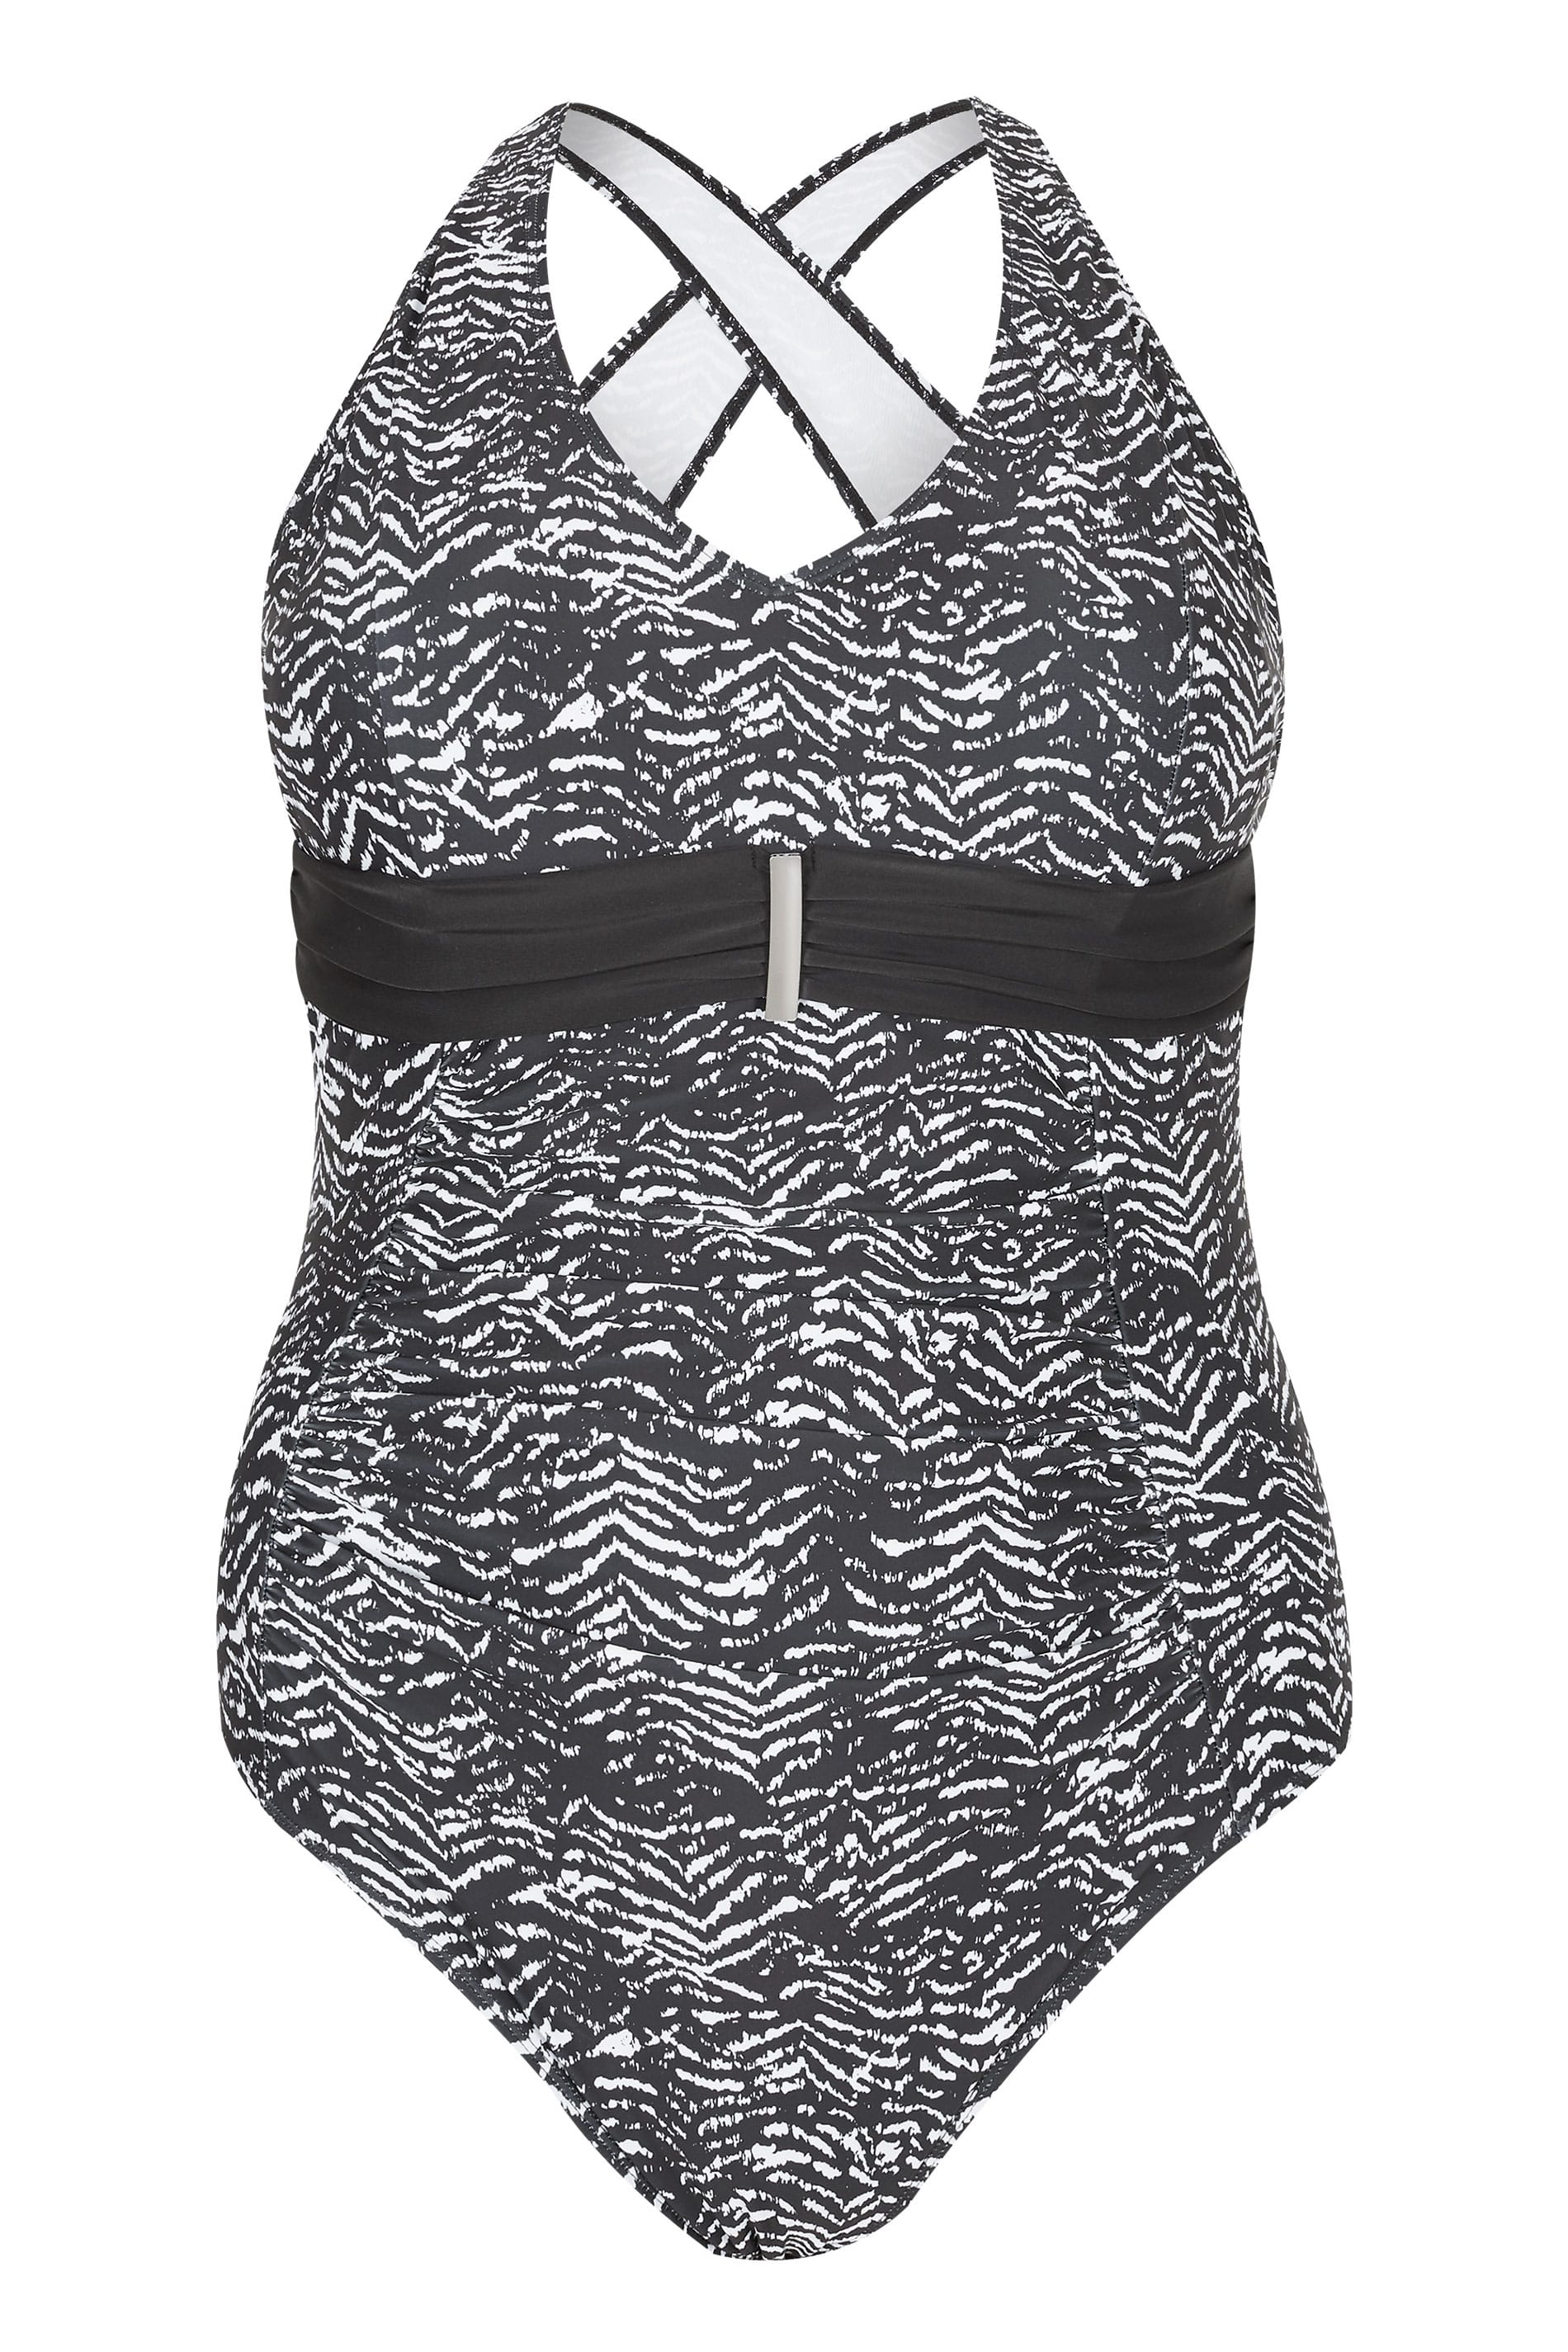 Black & White Animal Print Swimsuit | Plus Size 16 to 36 | Yours Clothing